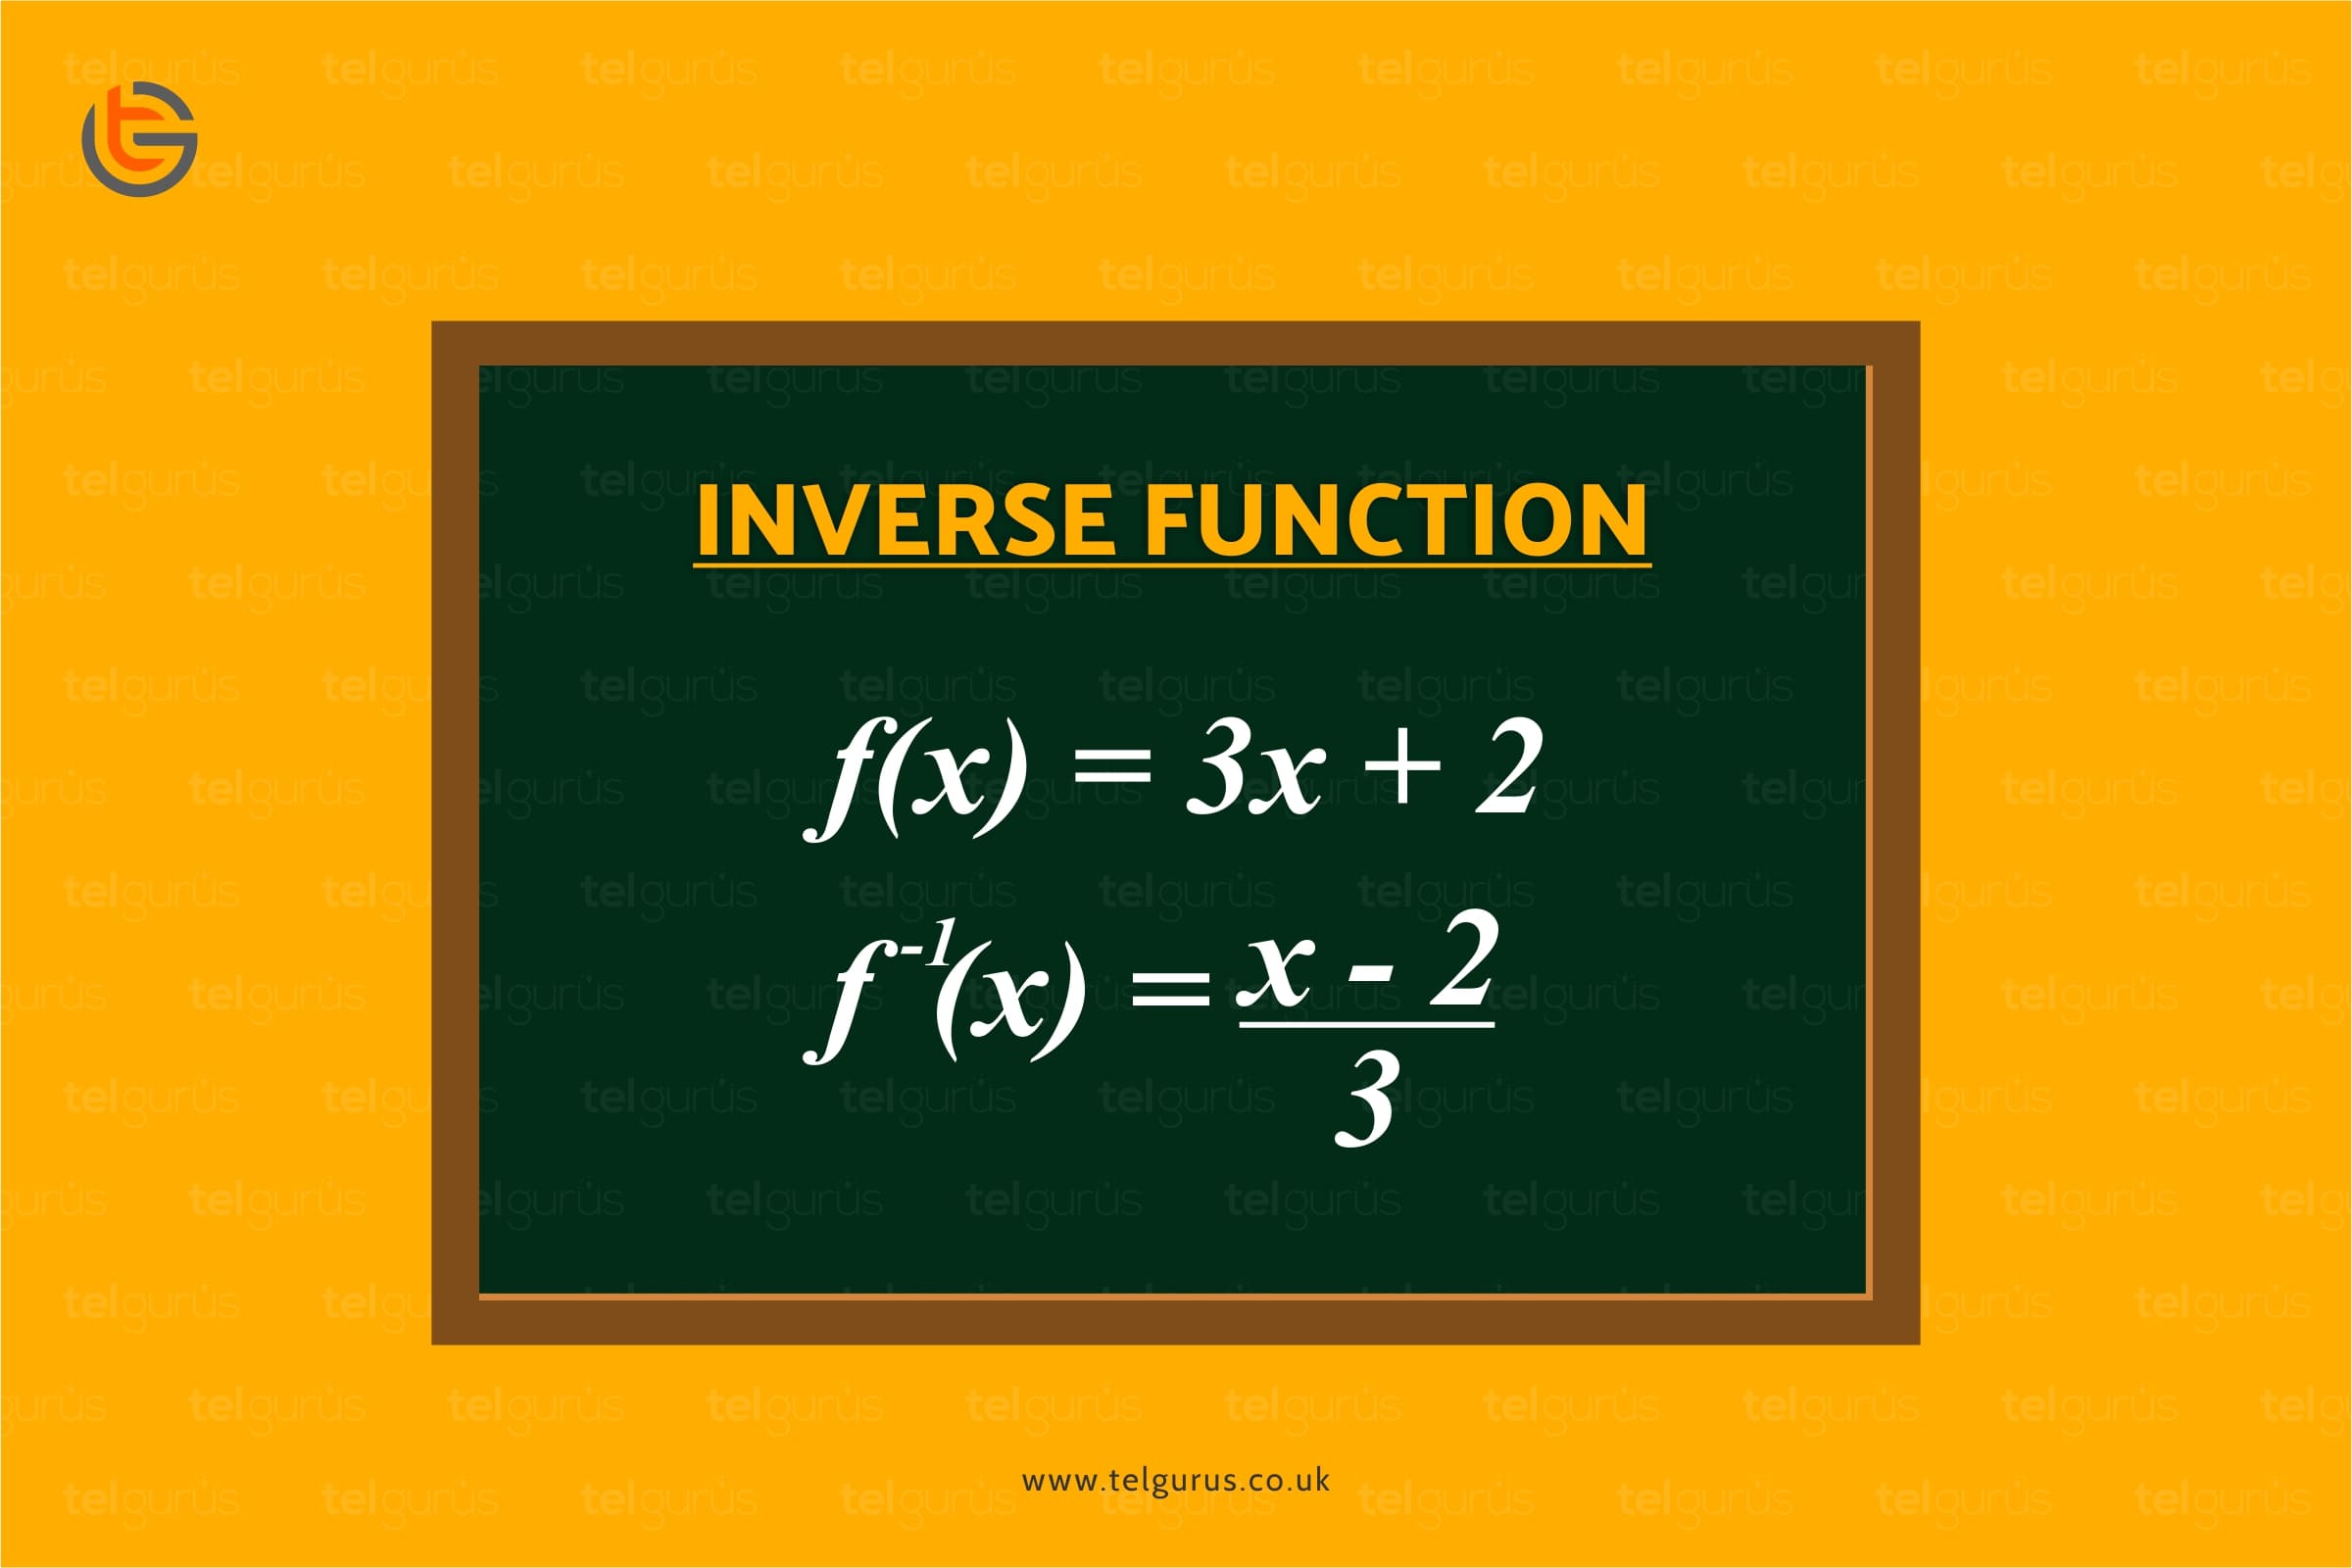 What is an Inverse function